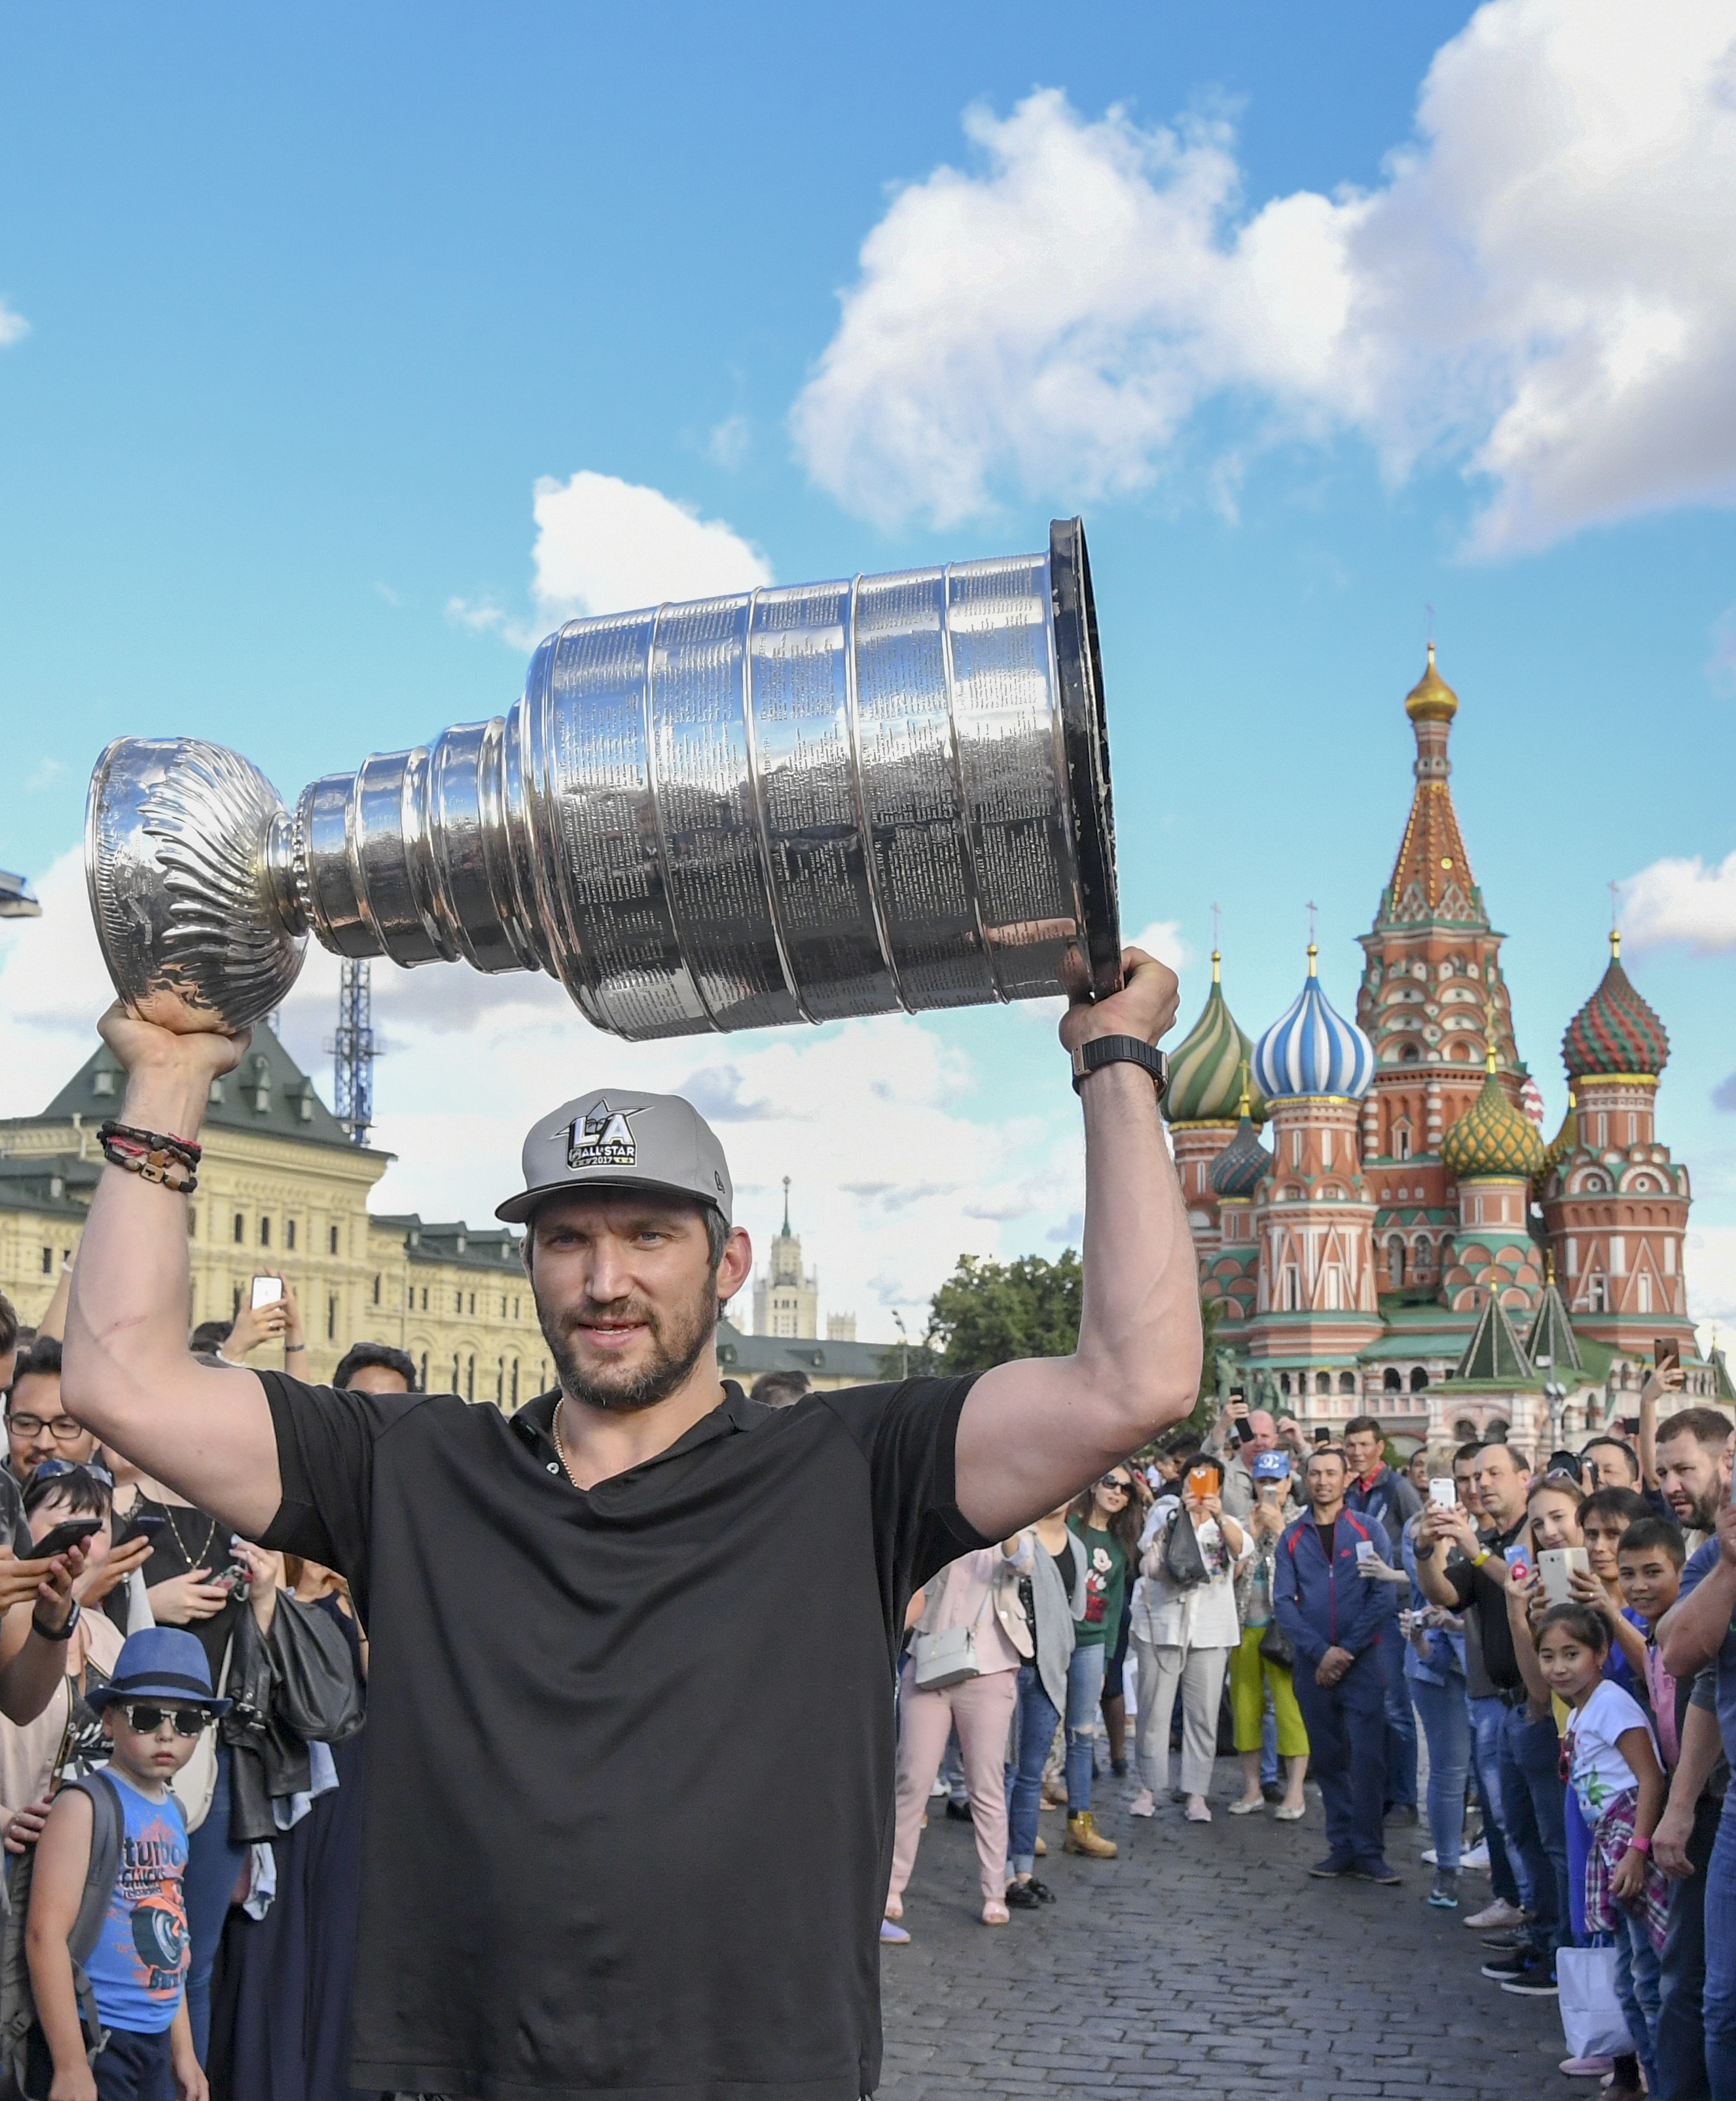 Washington Capitals captain Alex Ovechkin tours his home with the Stanley Cup.